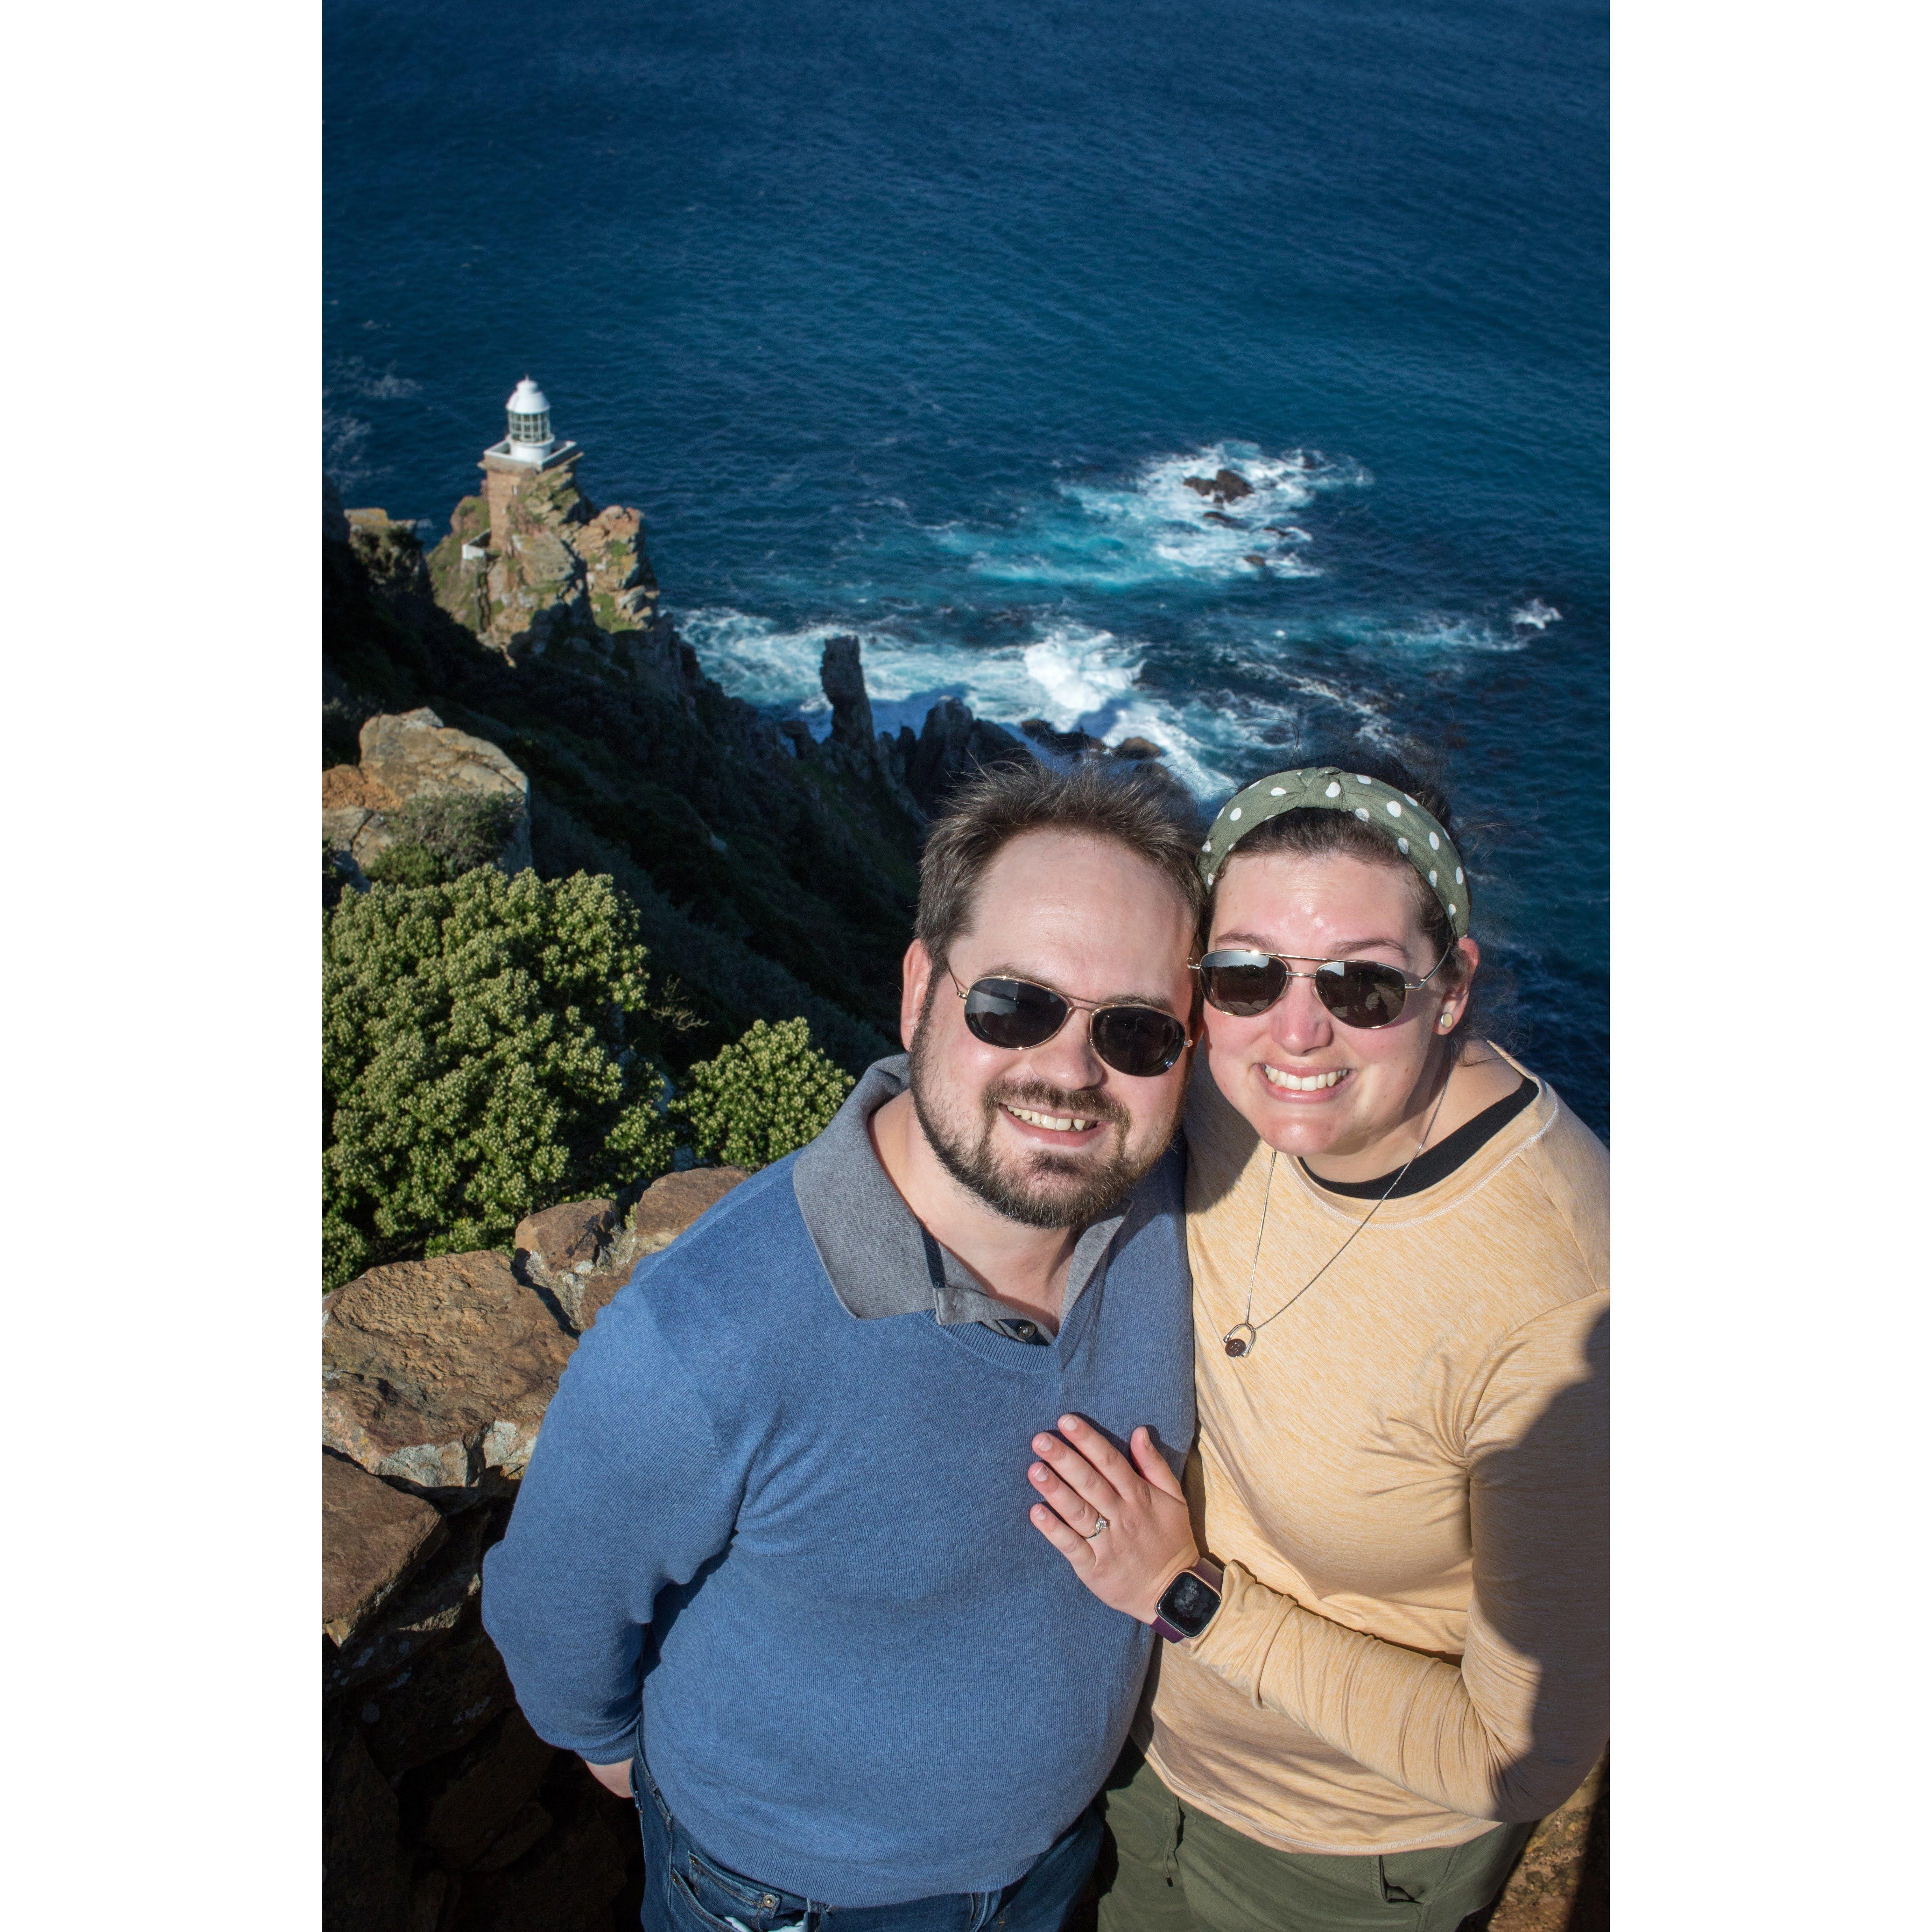 Right after Megan said "yes"!
Cape Point, SA
July 2022